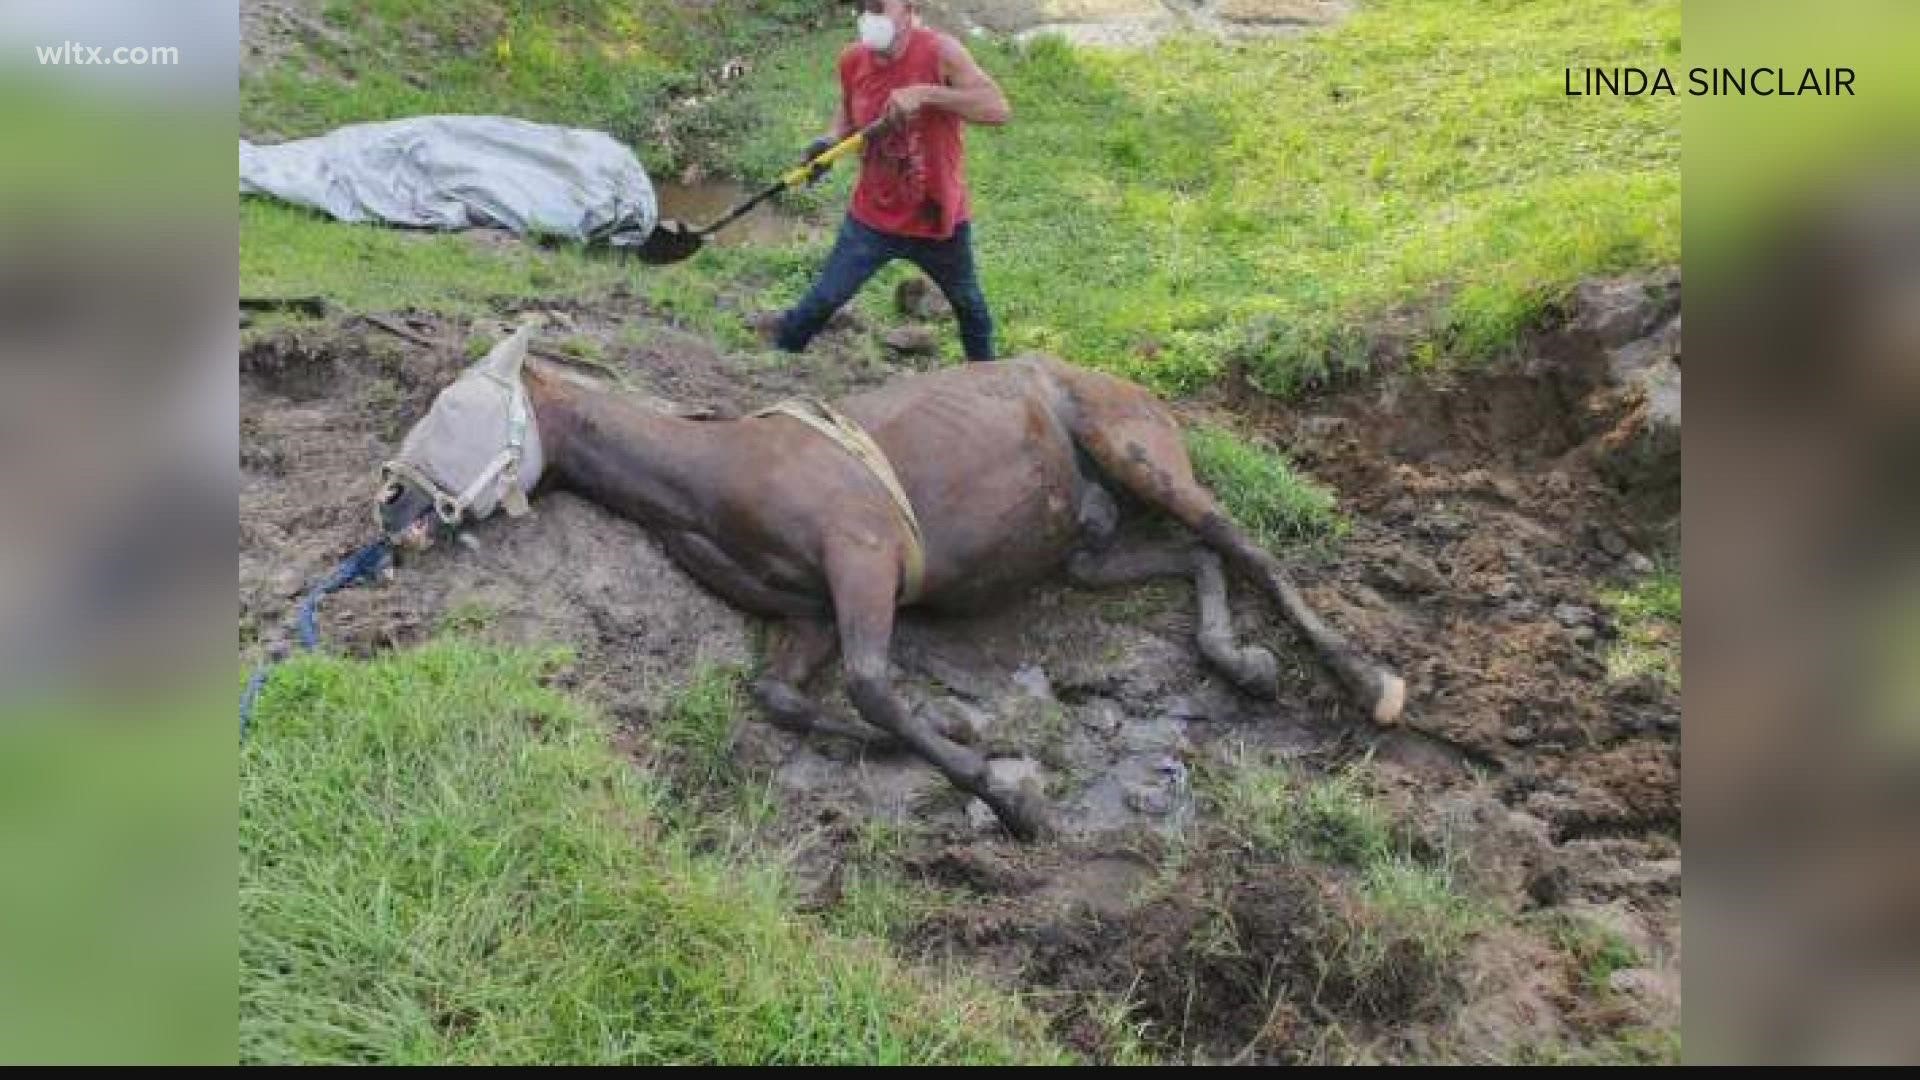 One horse in Pelion has lived to tell the tale.